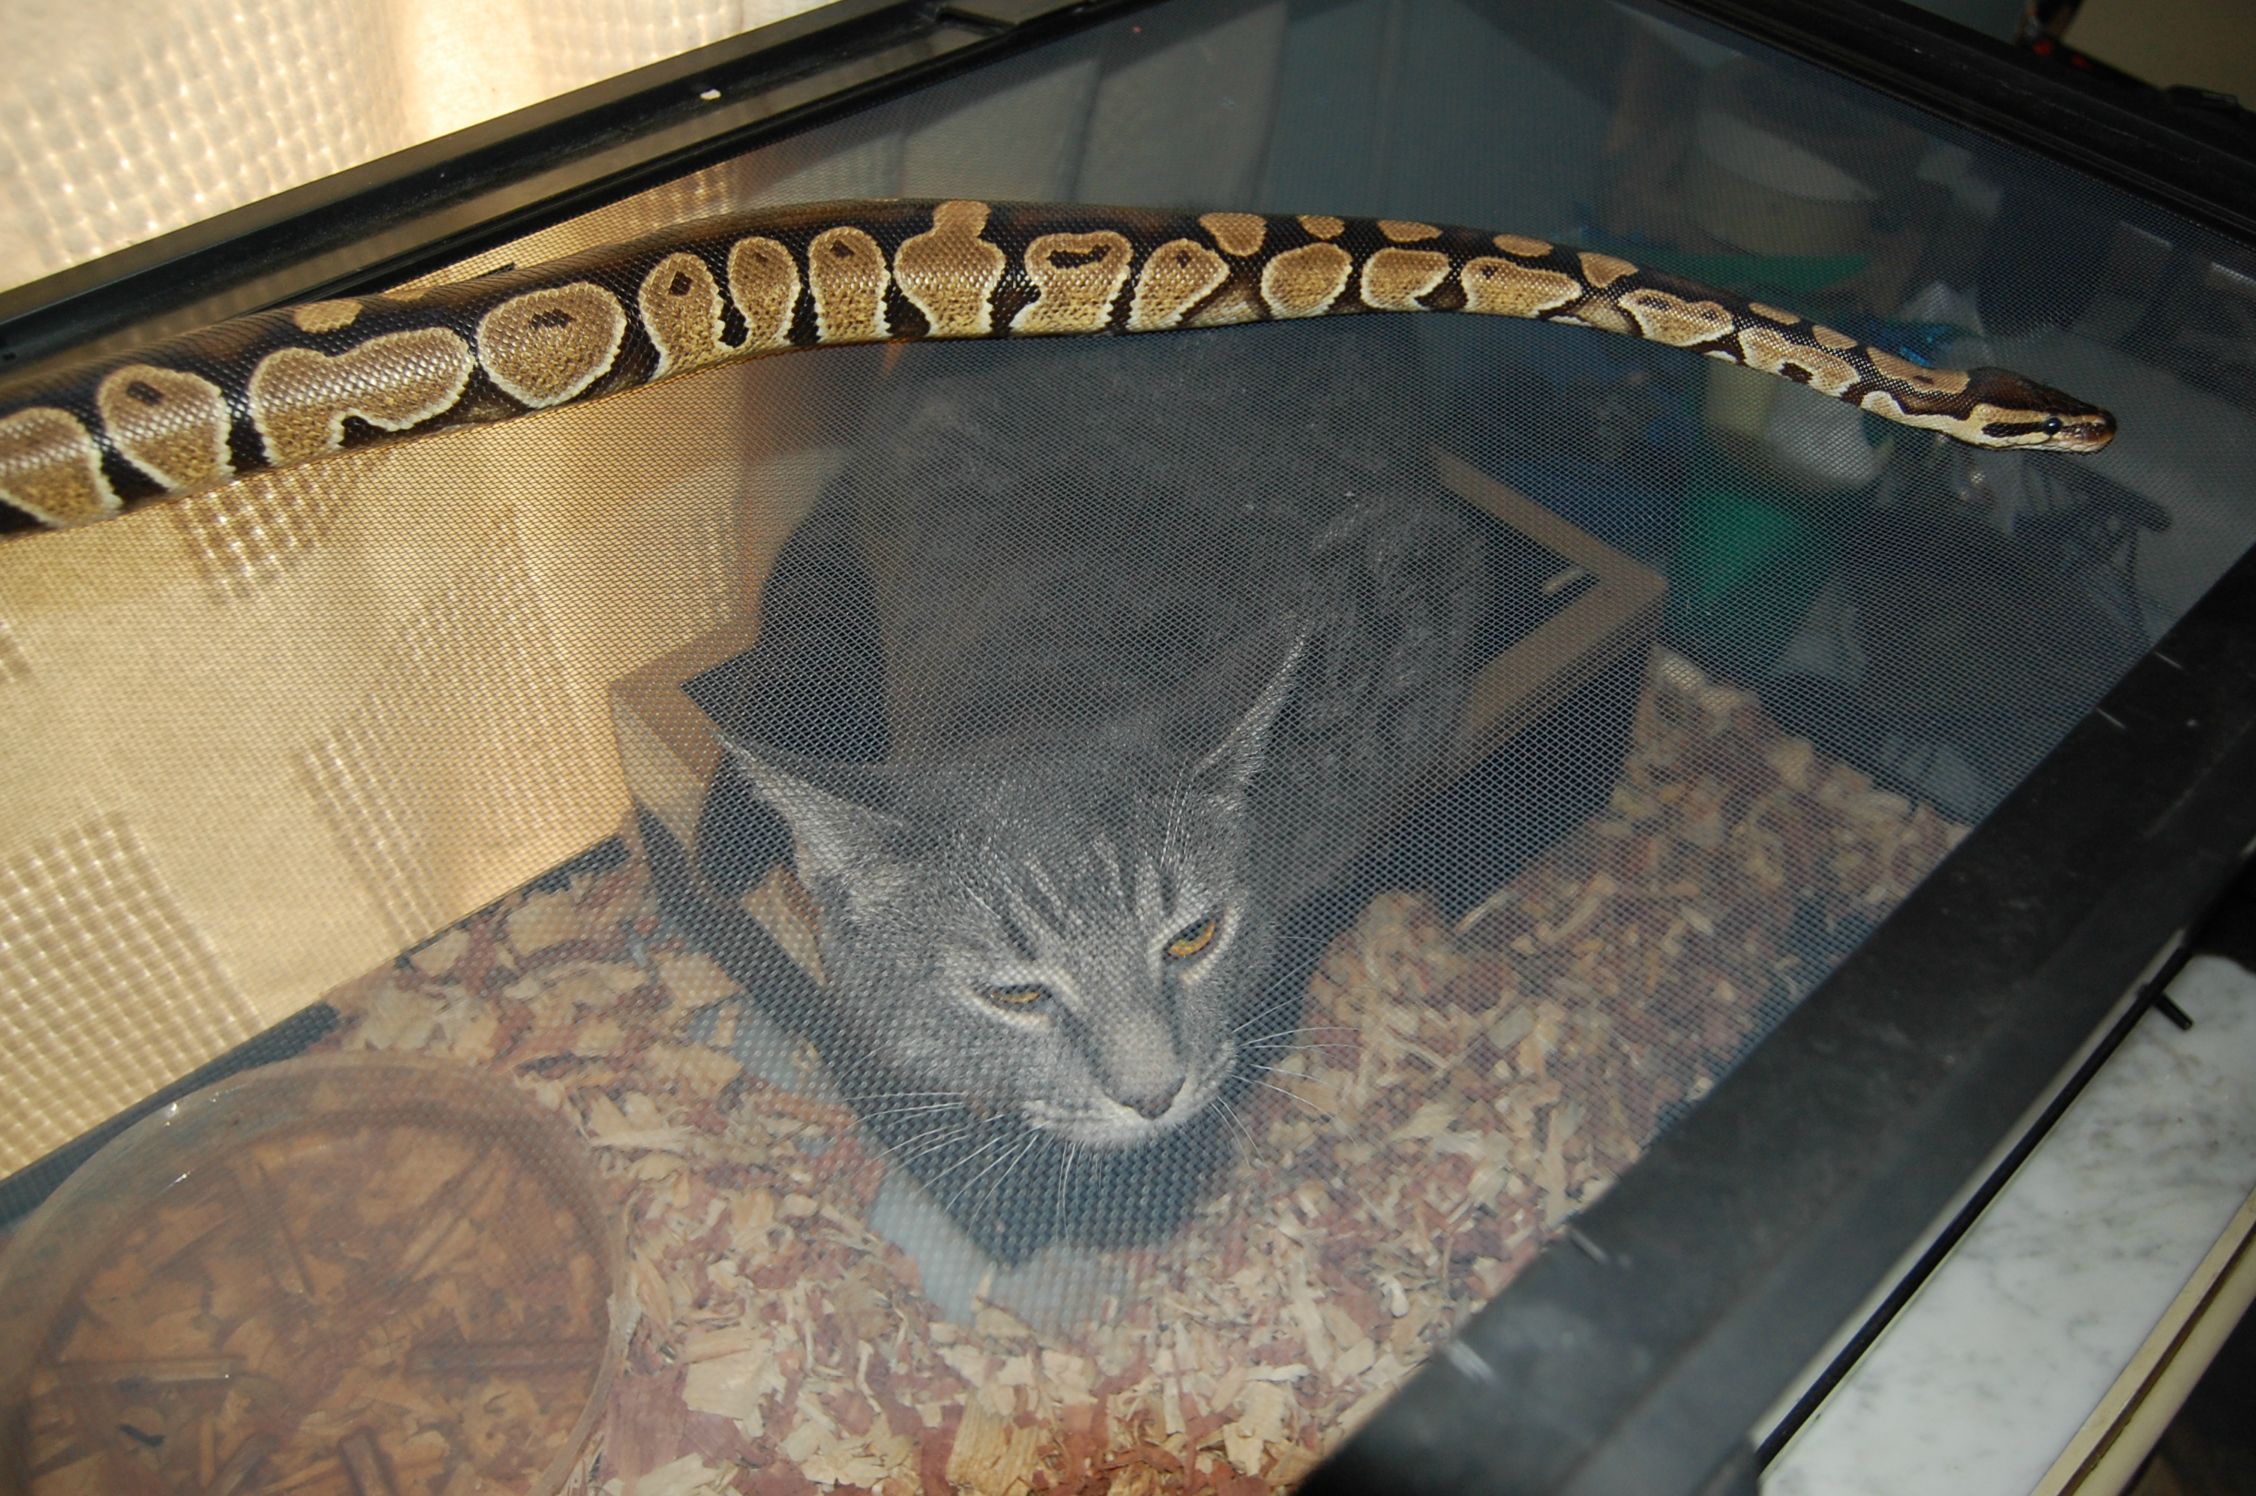 Cat wouldn't leave my snake alone. So I tried some role reversal